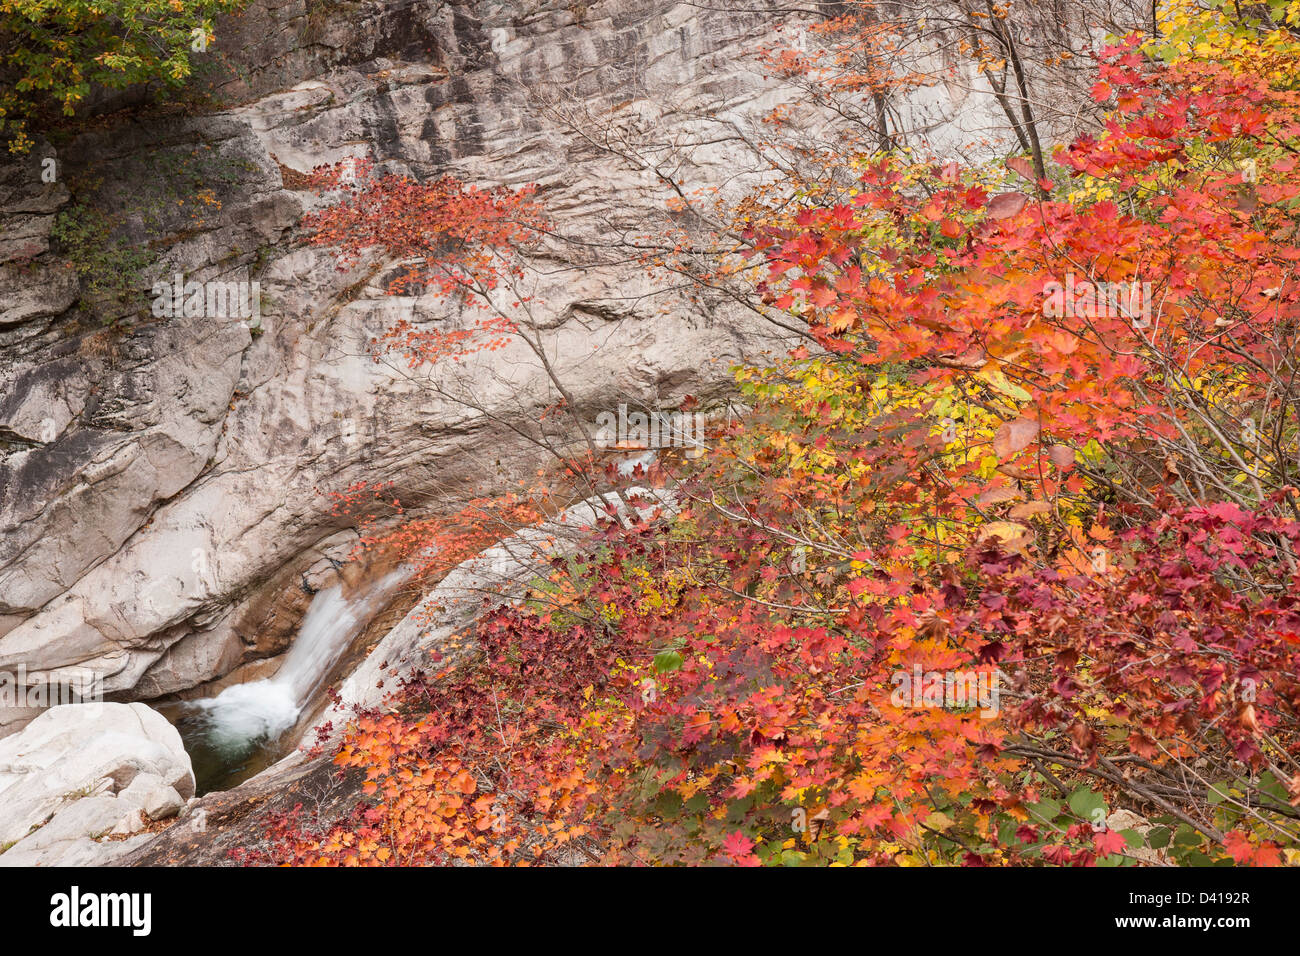 Cheonbul-dong Valley stream and Autumn colors, Seoraksan National Park, South Korea Stock Photo